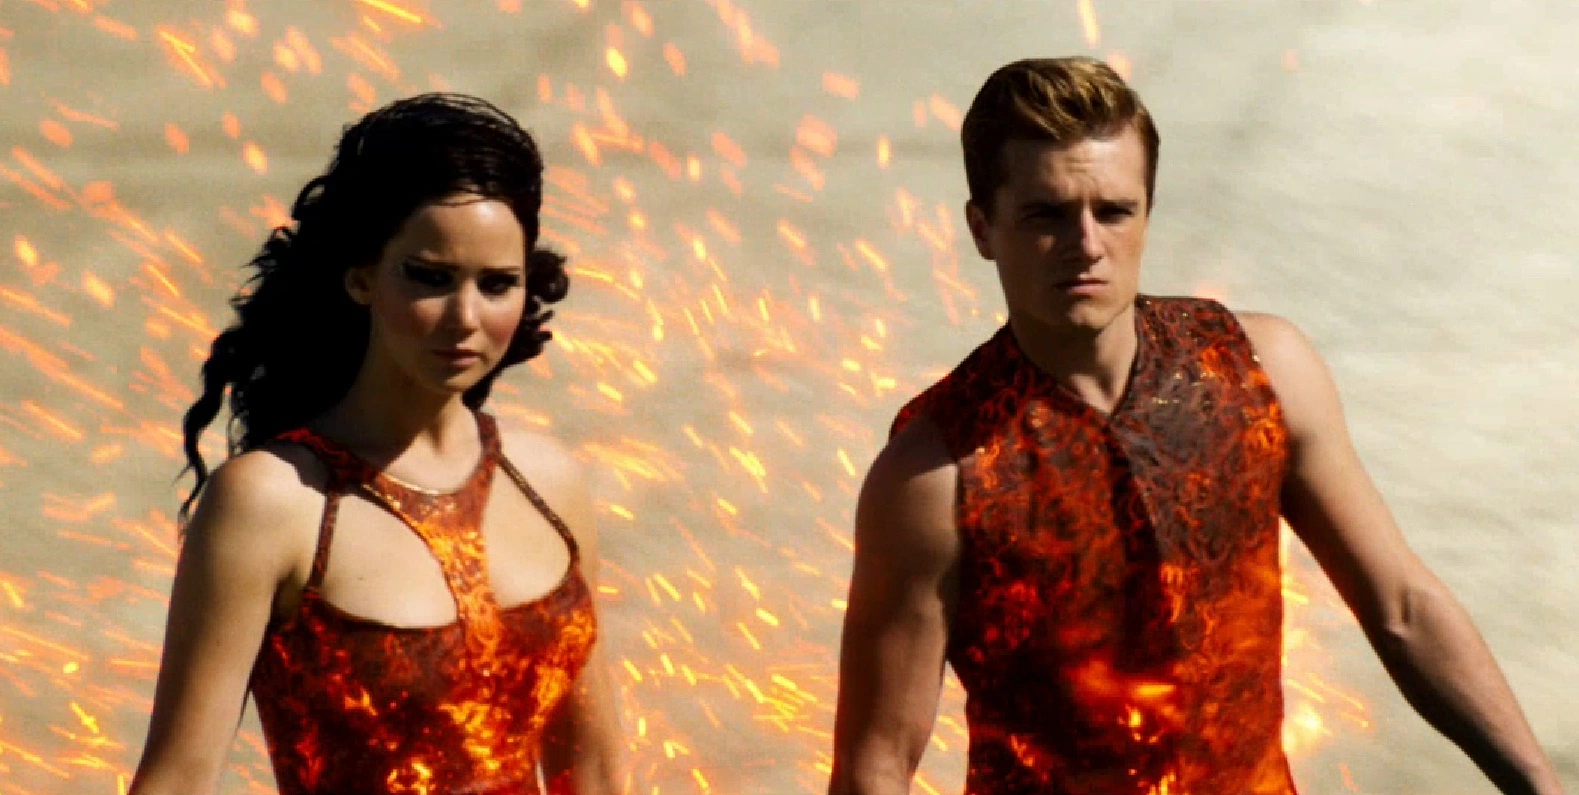 Hunger Games: Catching Fire- 2013